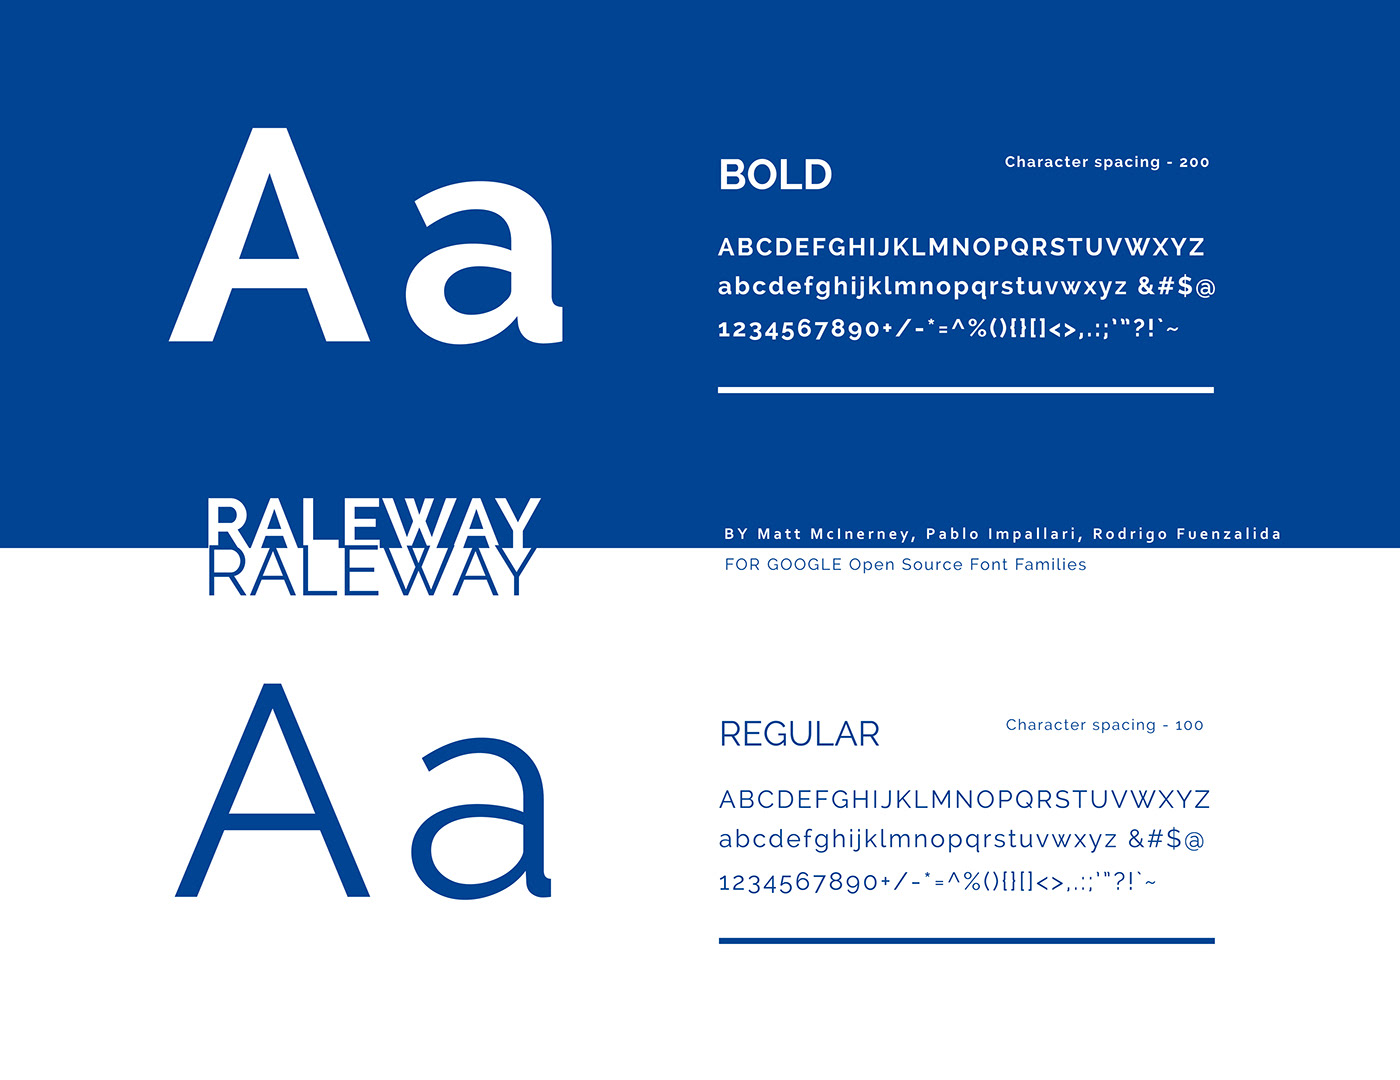 font used for branding, Raleway by google fonts.